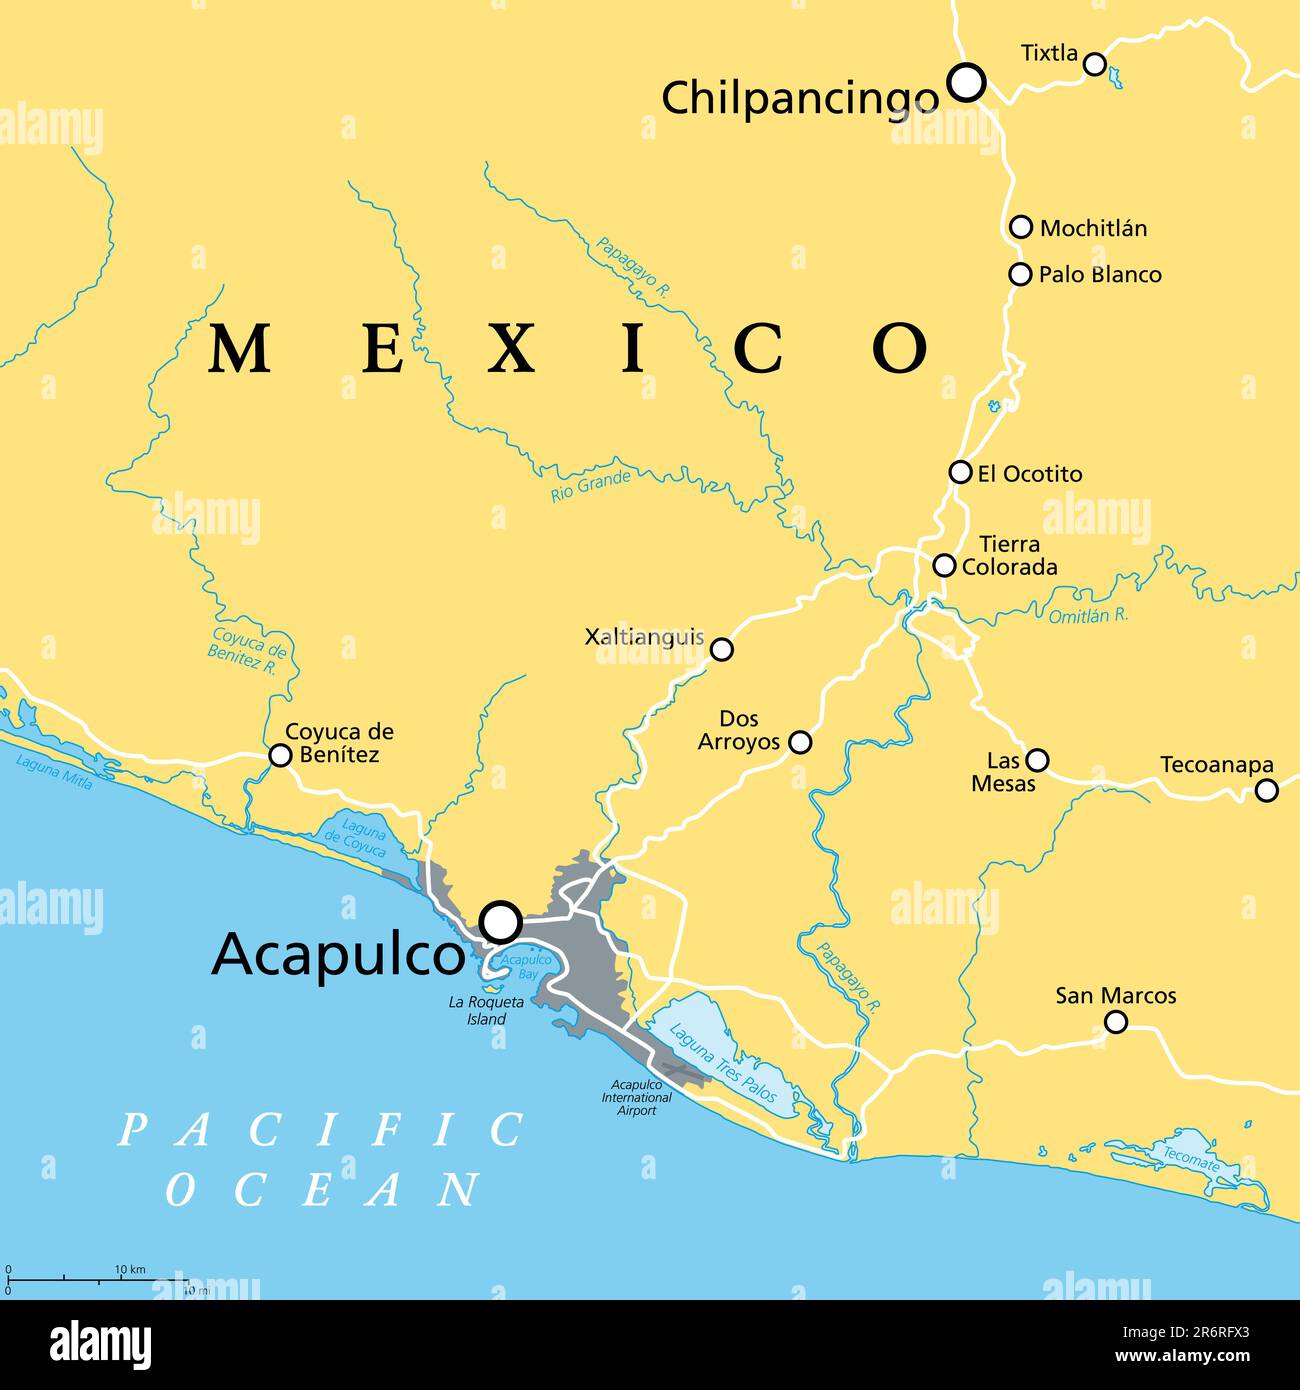 Acapulco and surroundings, political map. Acapulco de Juarez, city and major port of call in state of Guerrero on the Pacific Coast of Mexico. Stock Photo